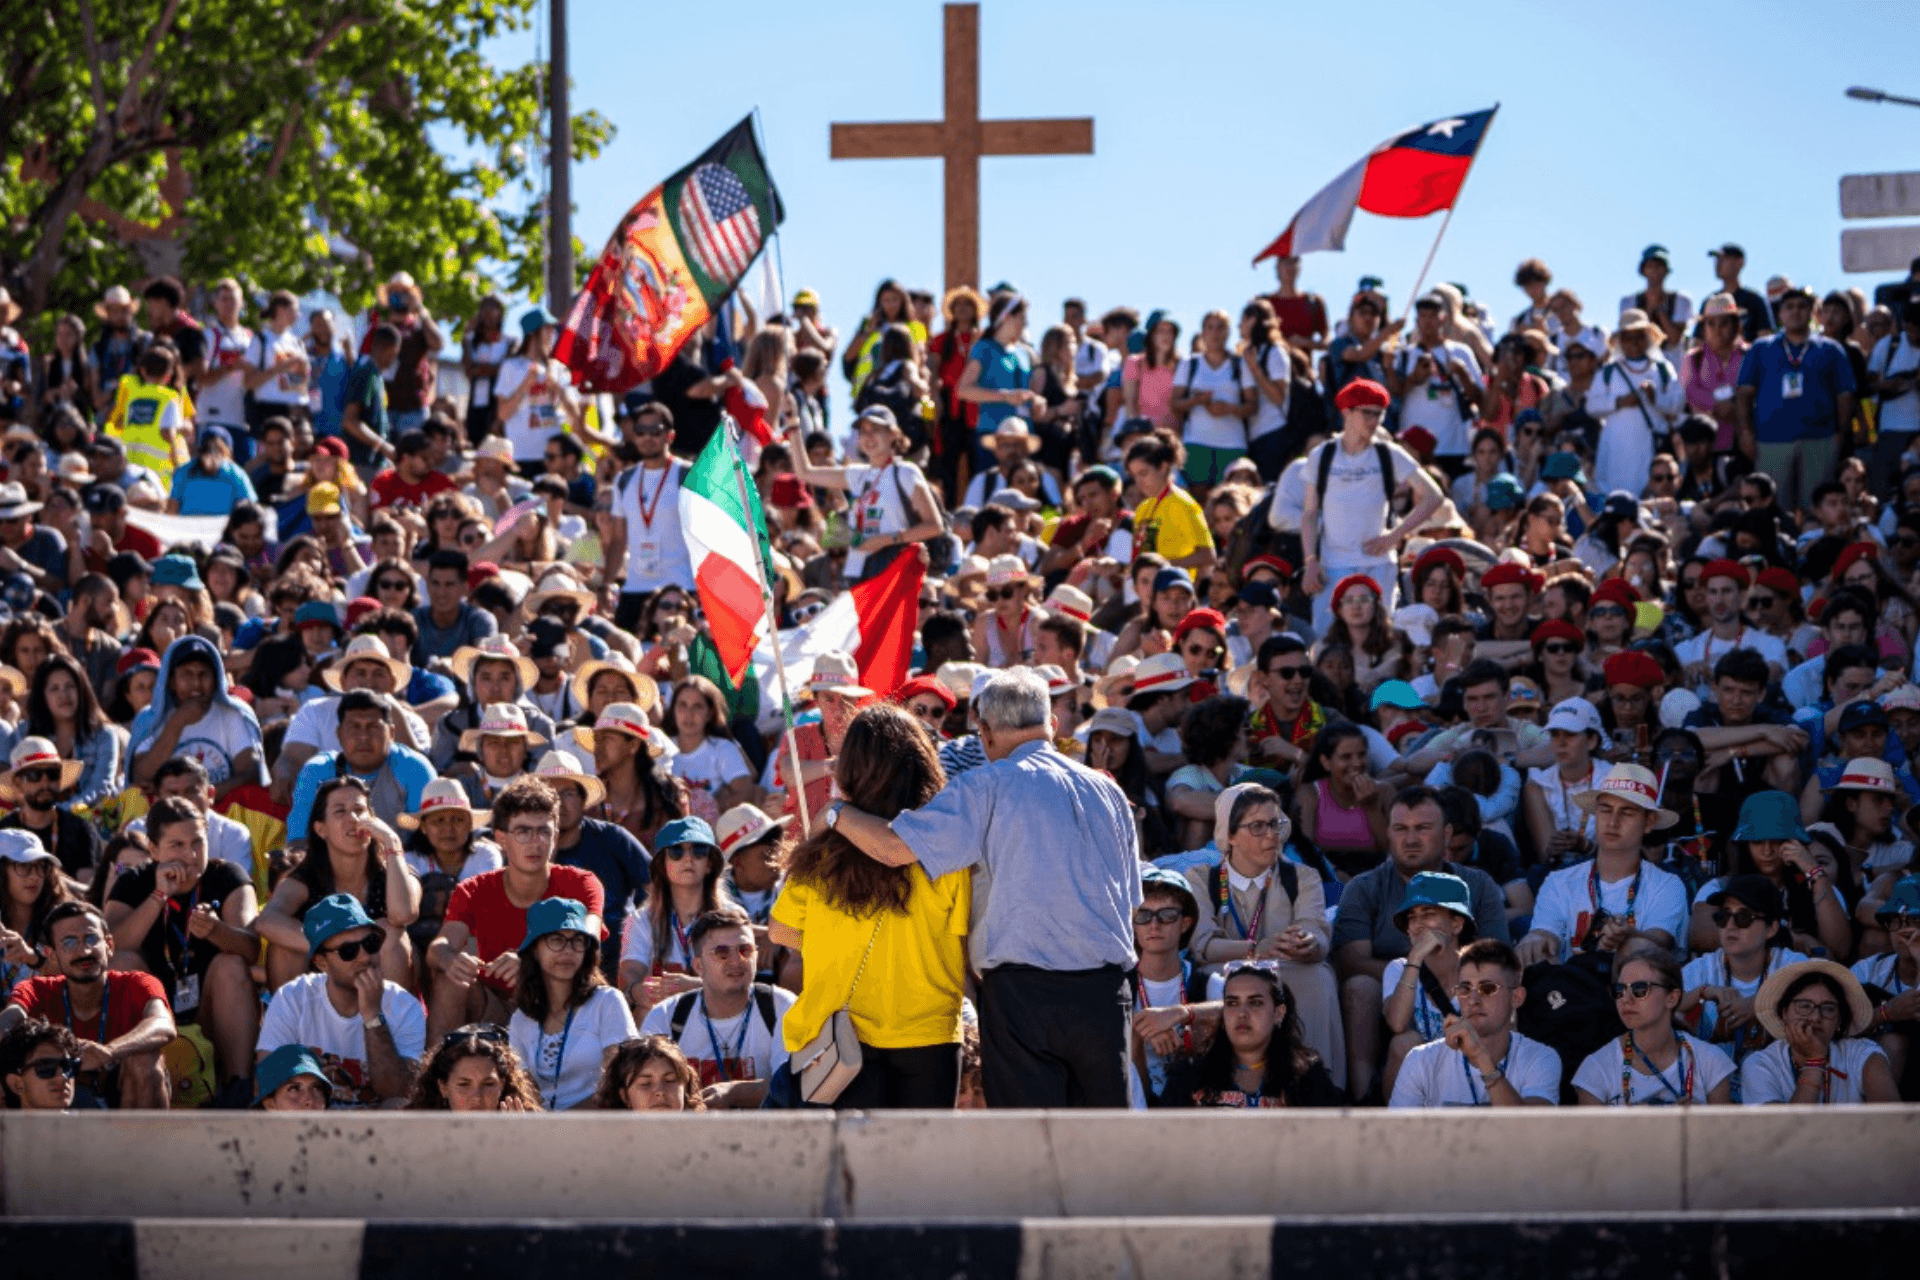 Featured image from the article: "Rally of Archdeaconries" in the Diocese of Aveiro